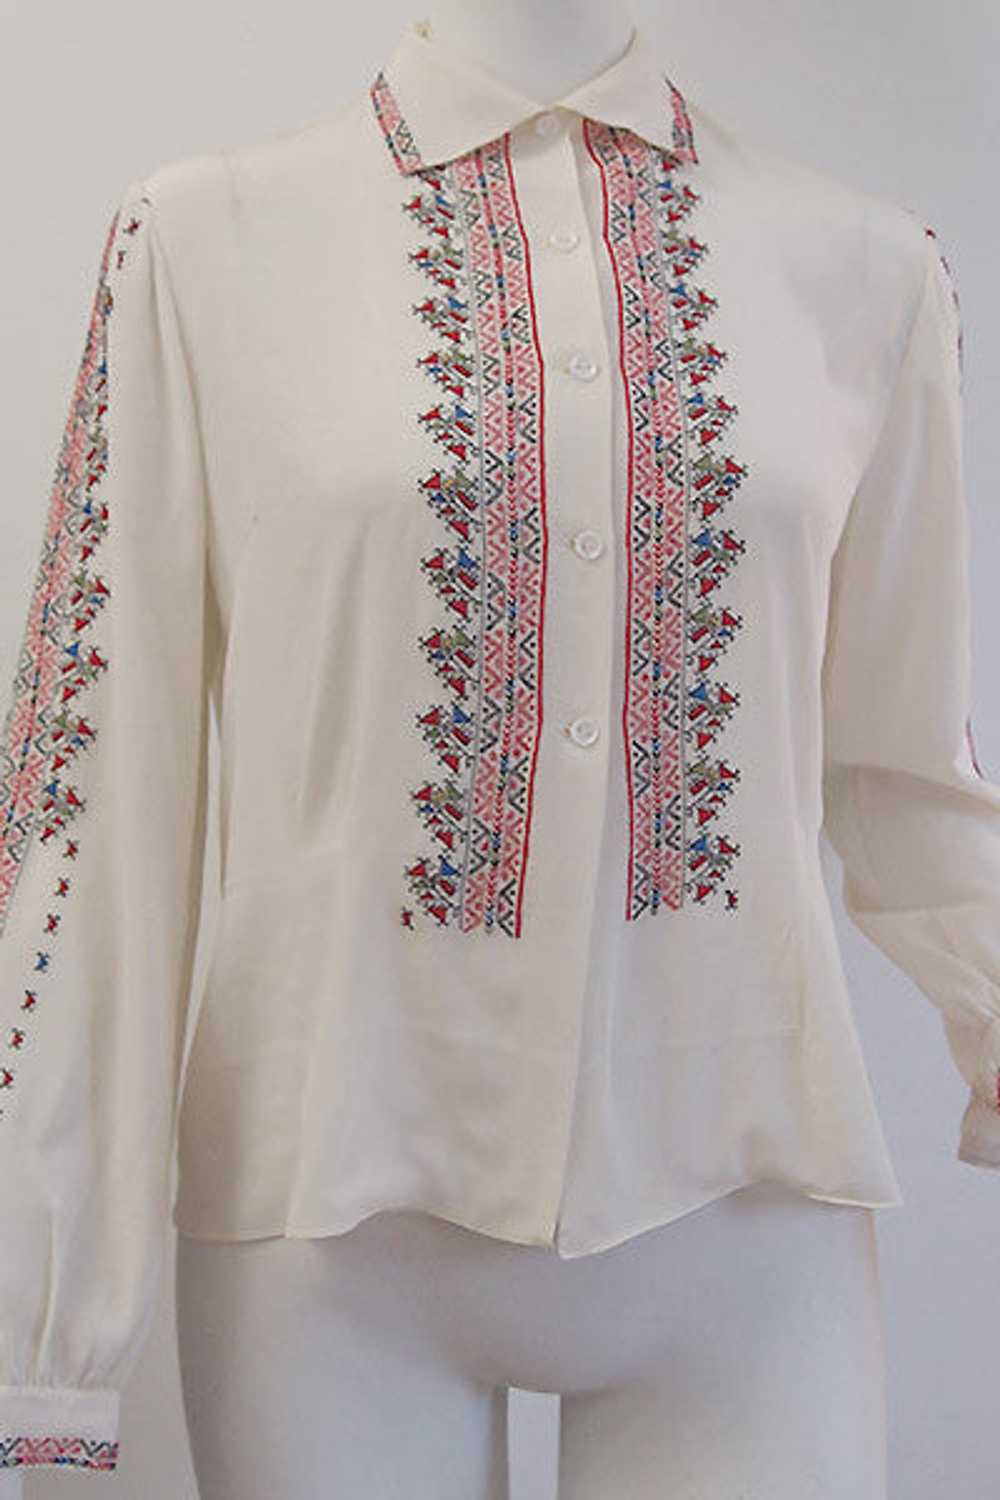 1950s Romanian Embroidered Peasant Blouse - image 2